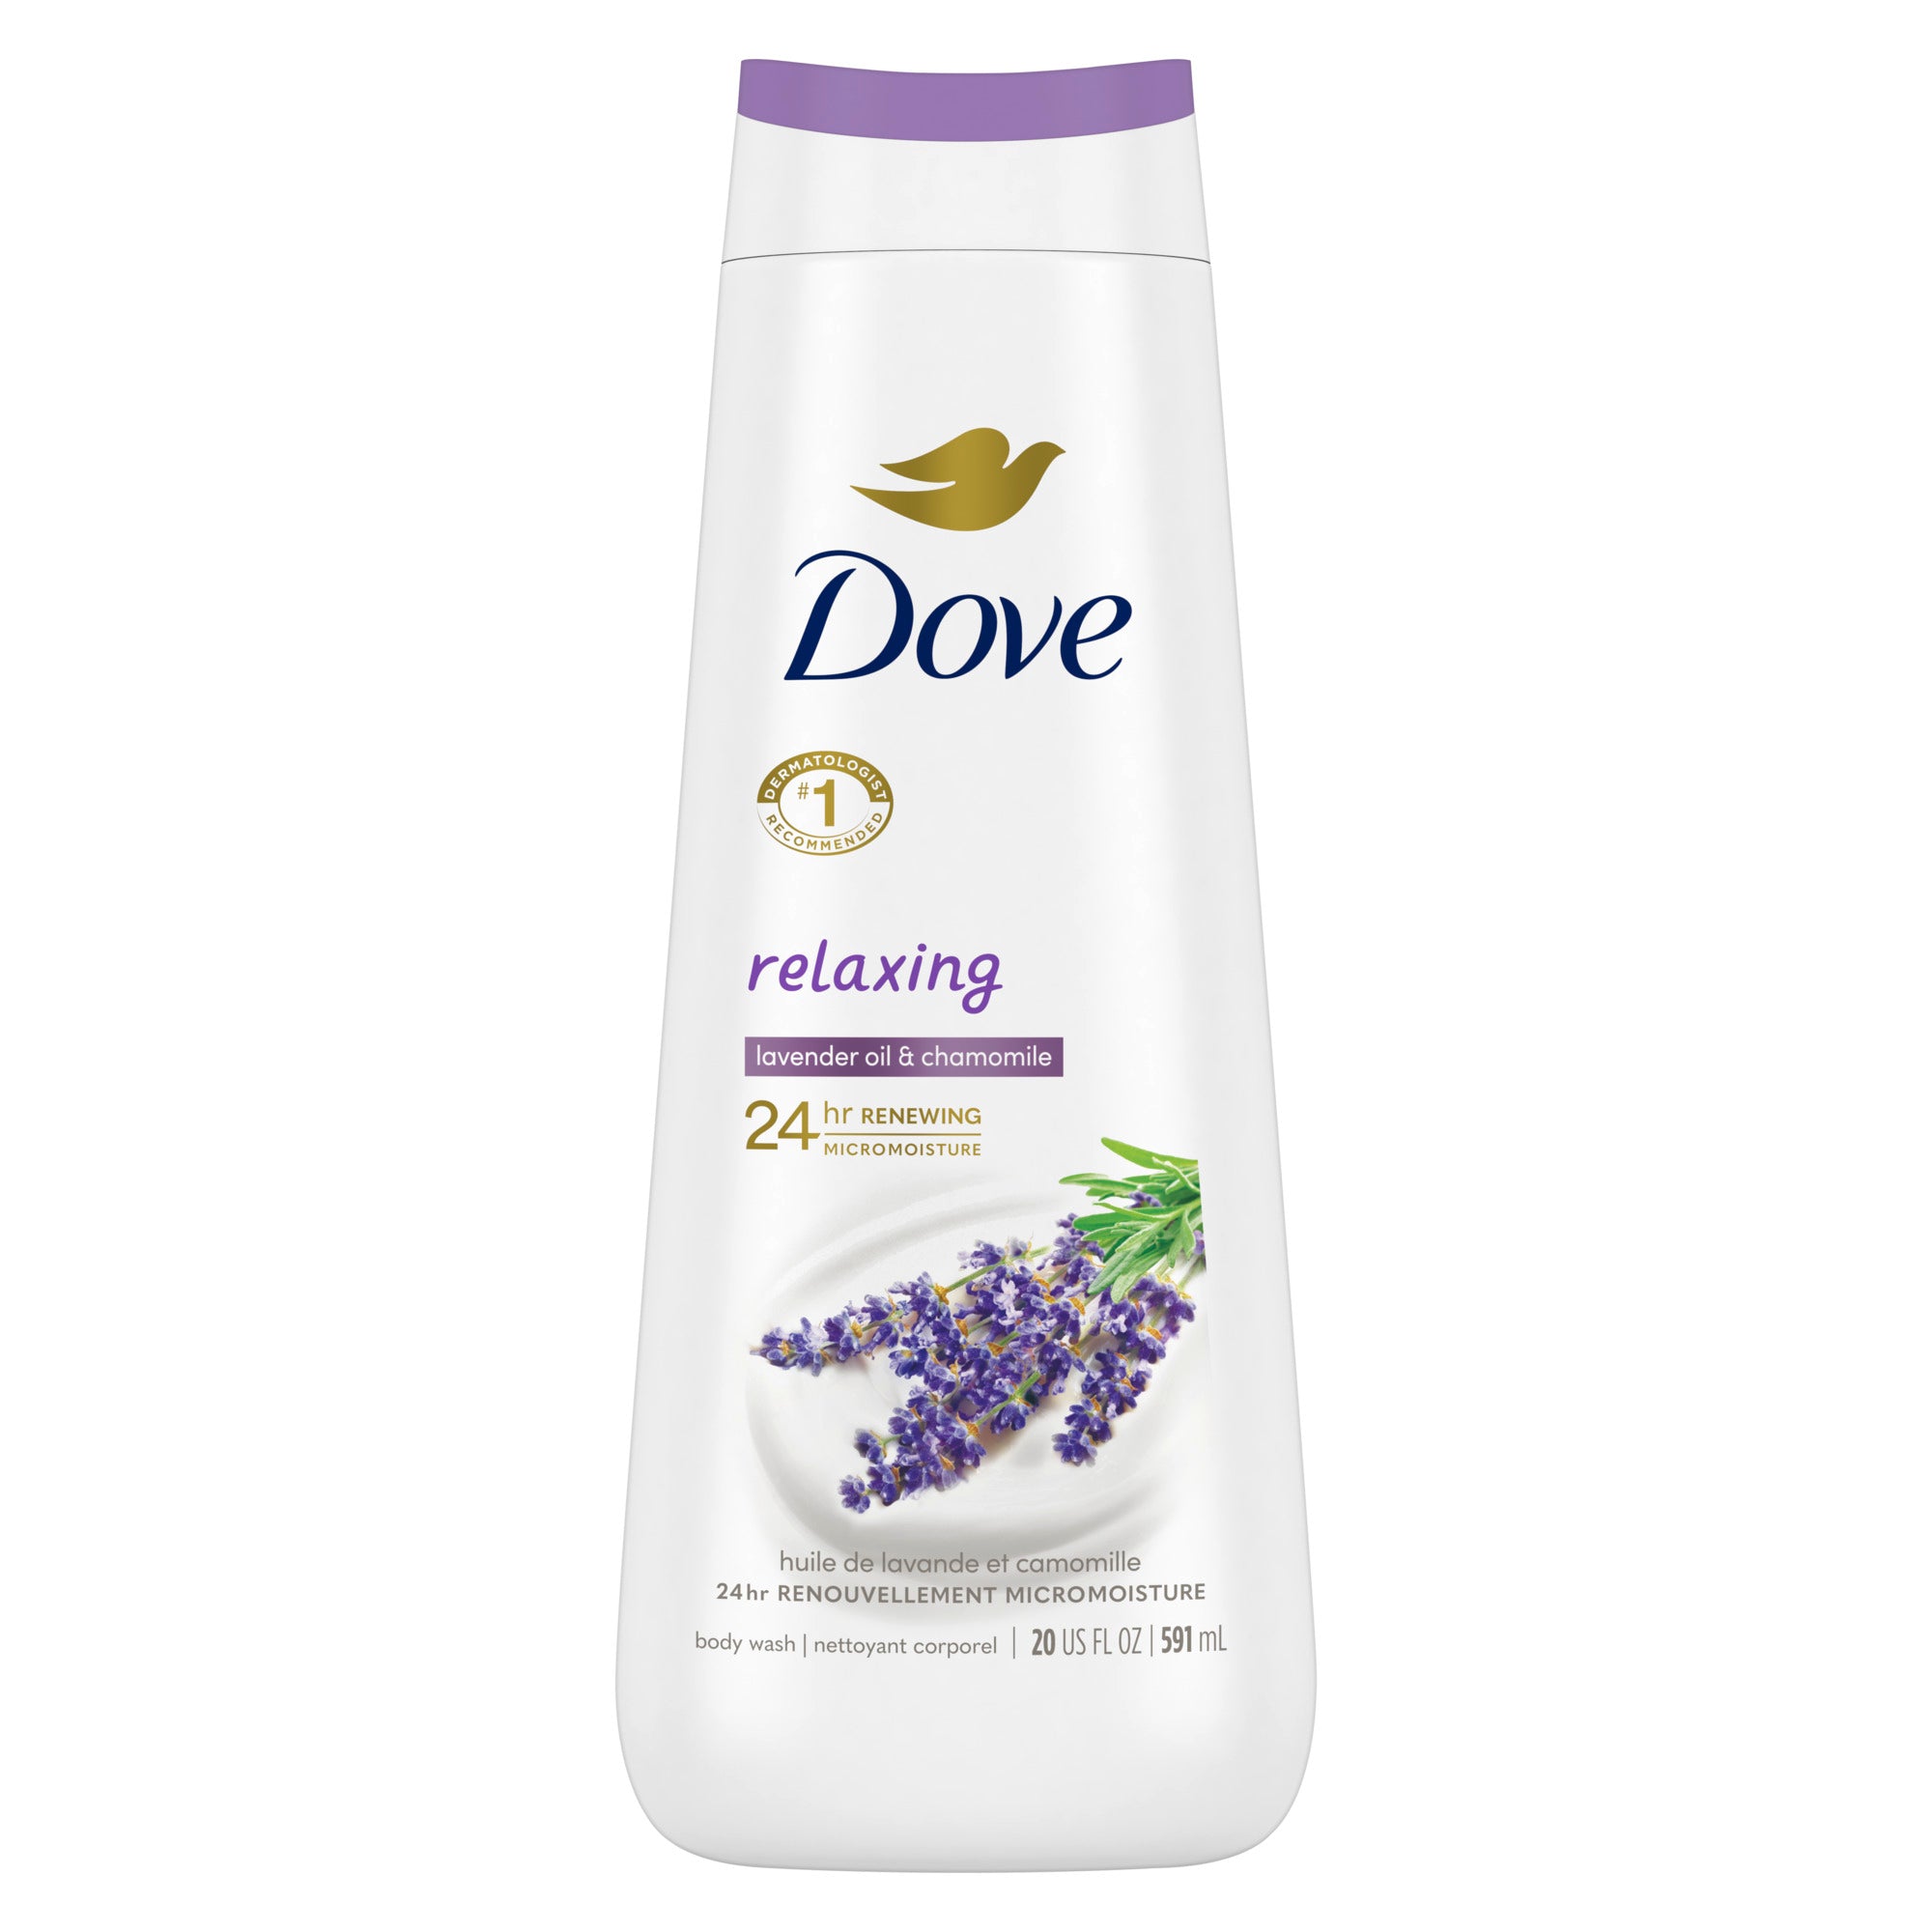 Showing the front angle view of the Dove Relaxing Lavender Oil & Chamomile Body Wash 650ml product.